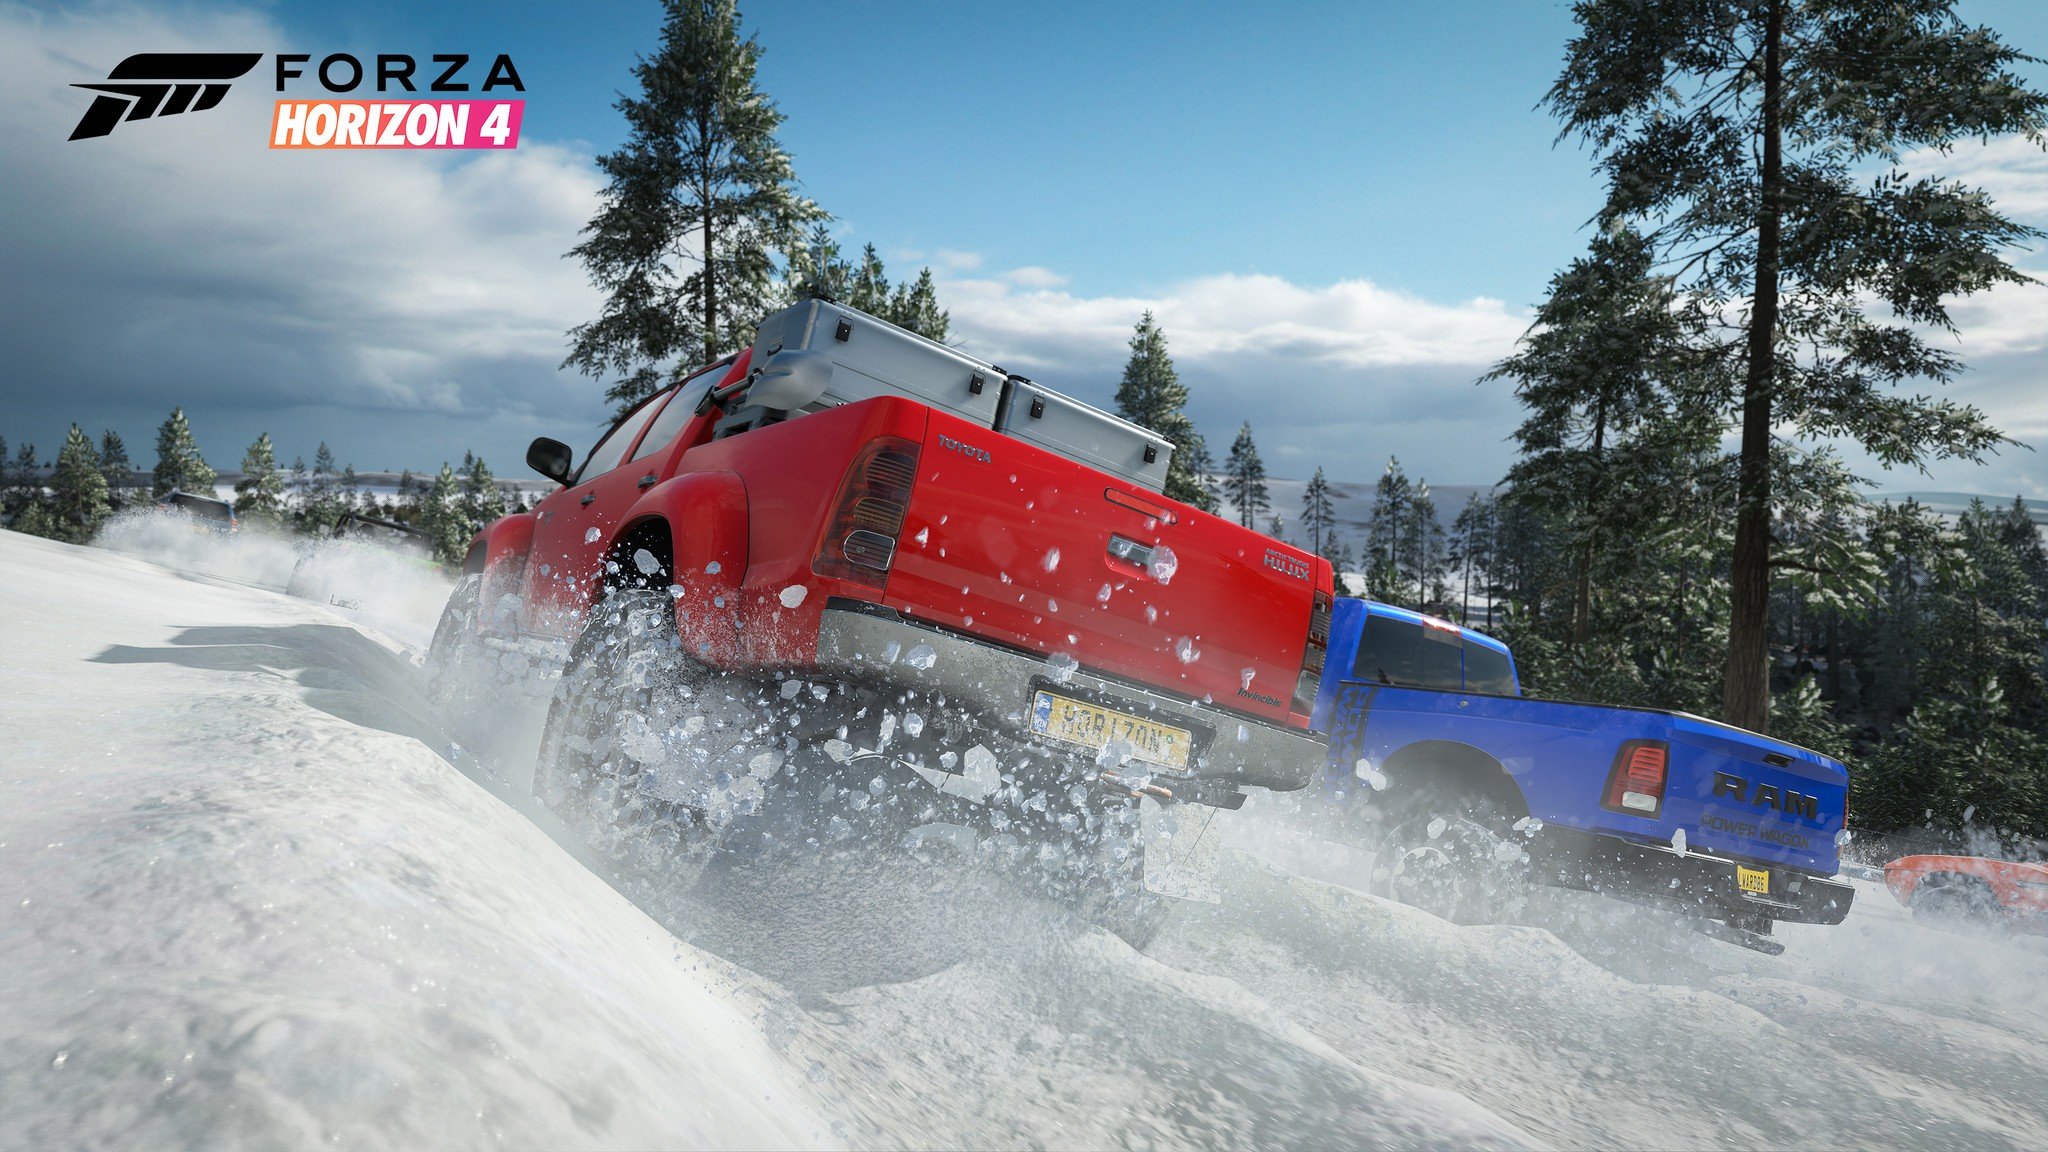 5c3dff12-e54d-4420-930c-c7abe93e97d4-1-300x199 Download Forza Horizon 4 for Android & iOS Mobile Phone